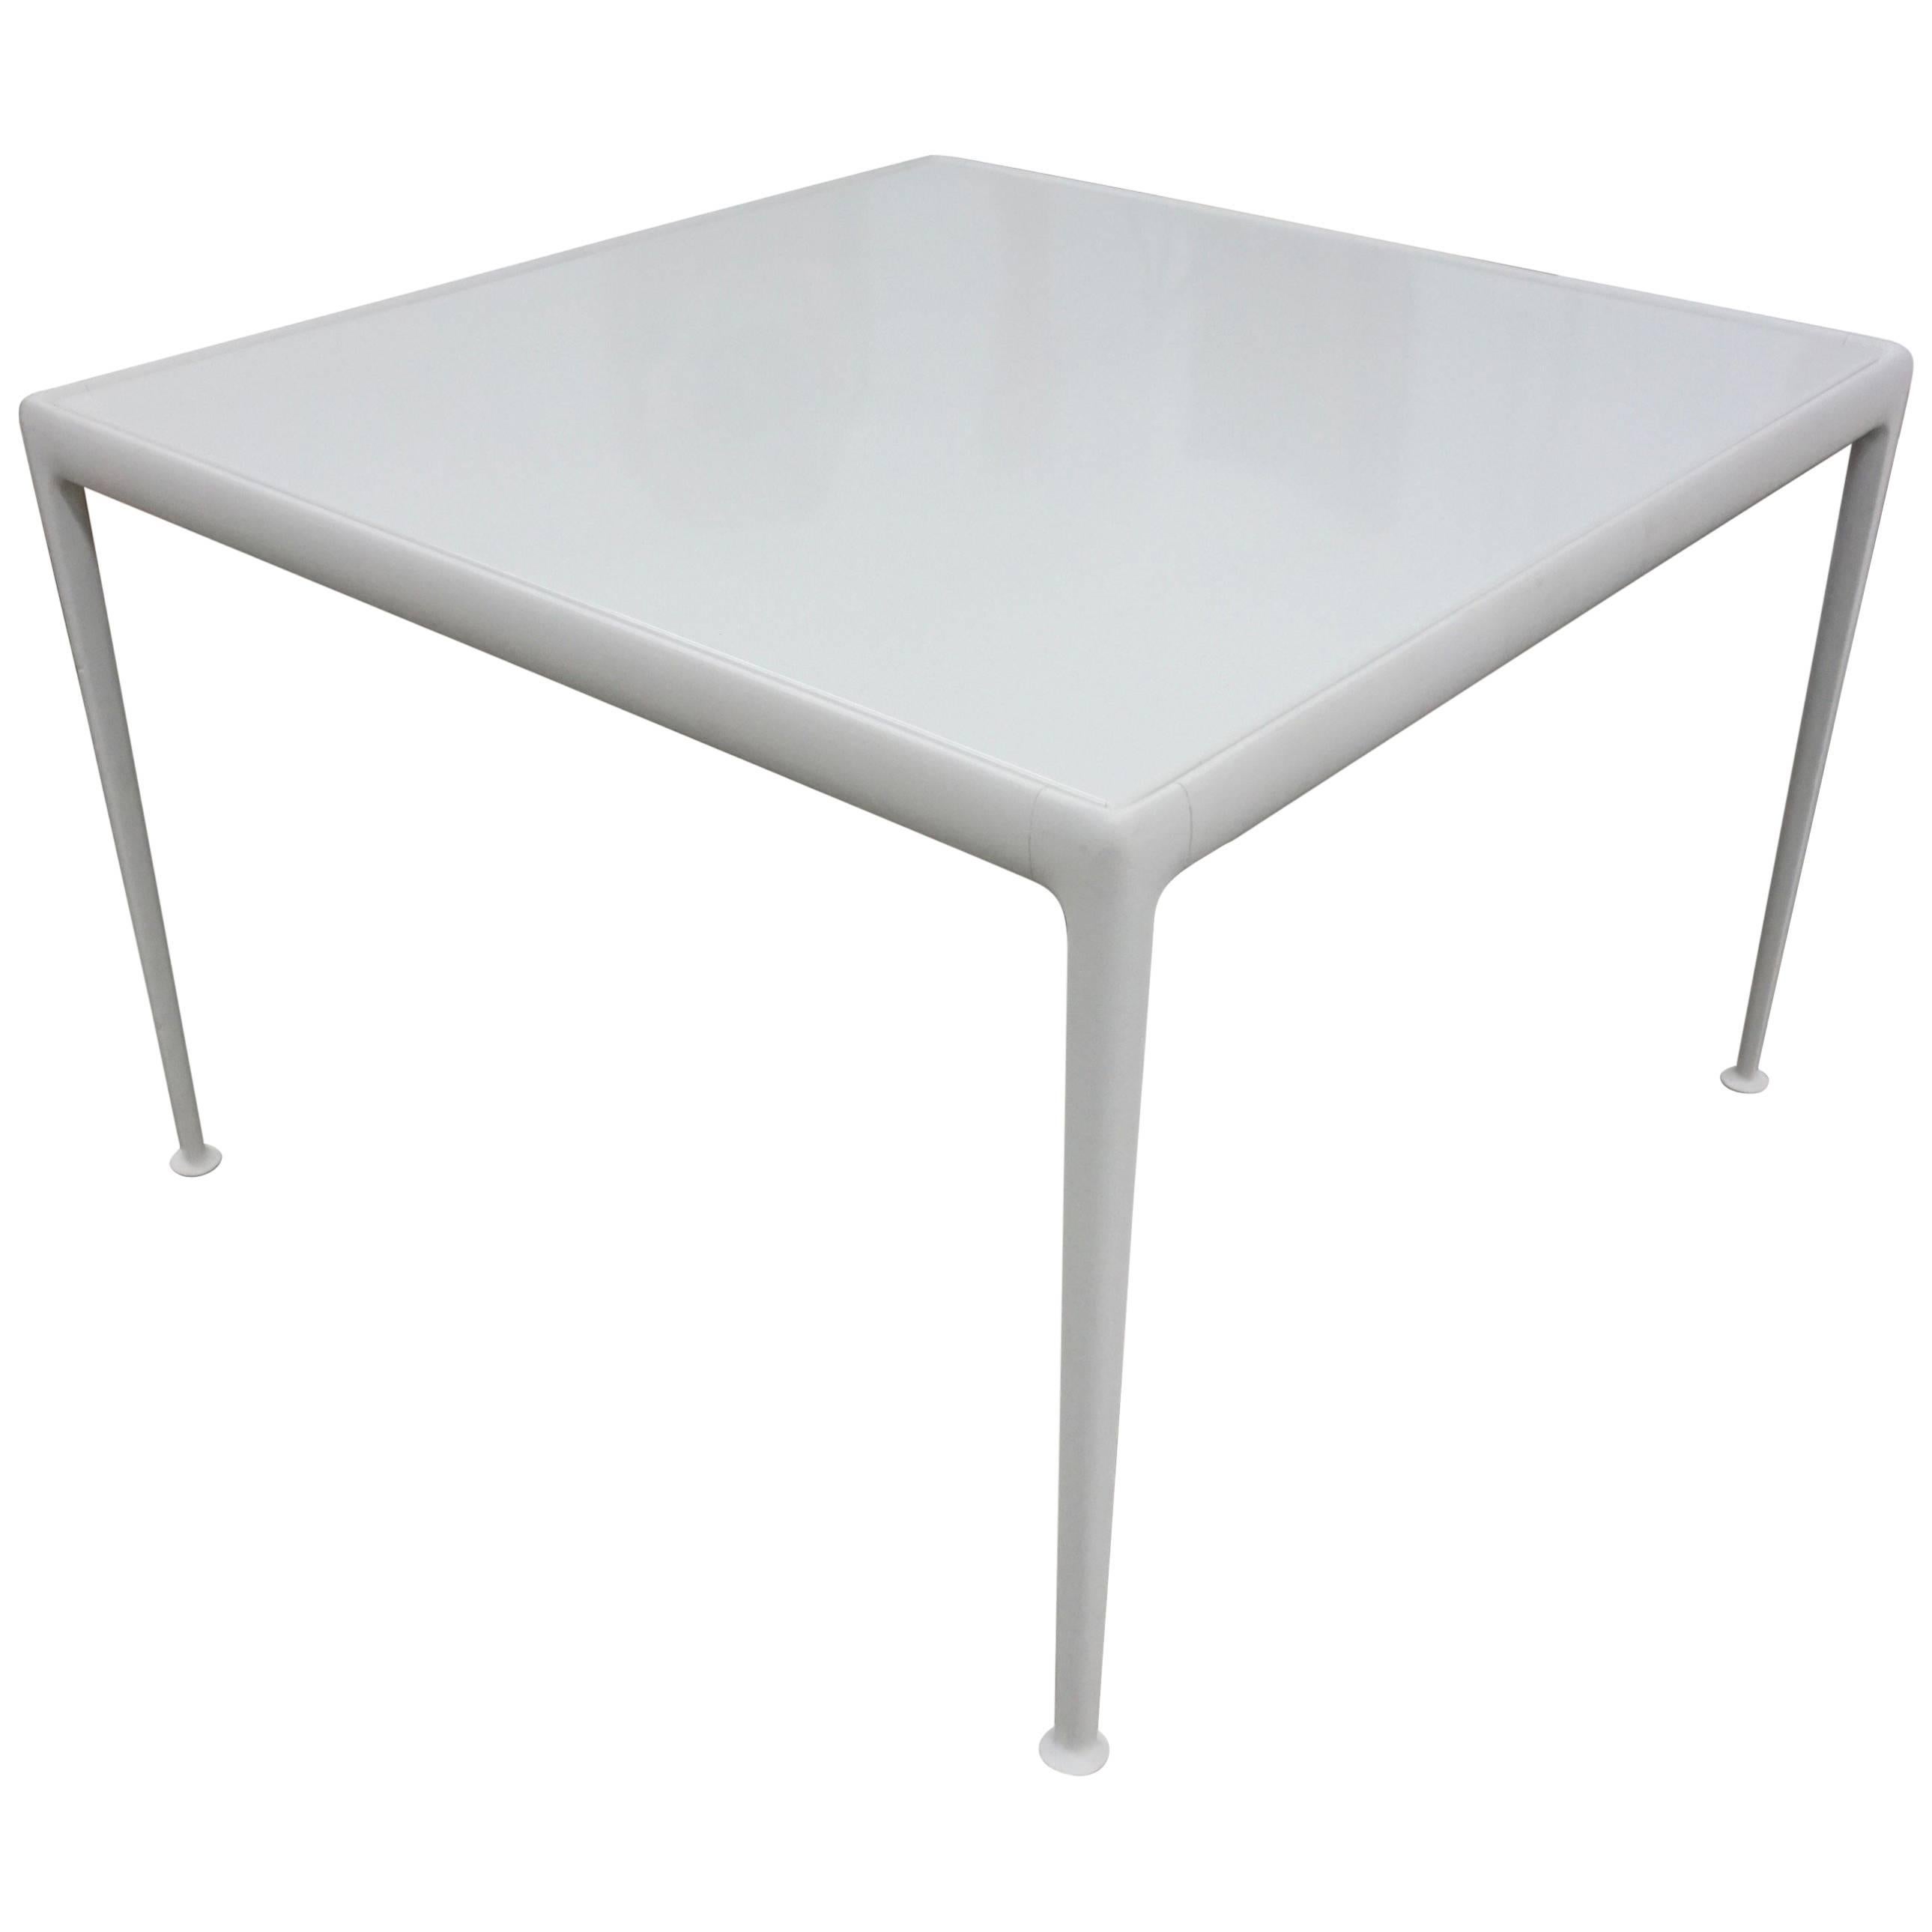 Richard Schultz "1966" Series Dining Table For Sale